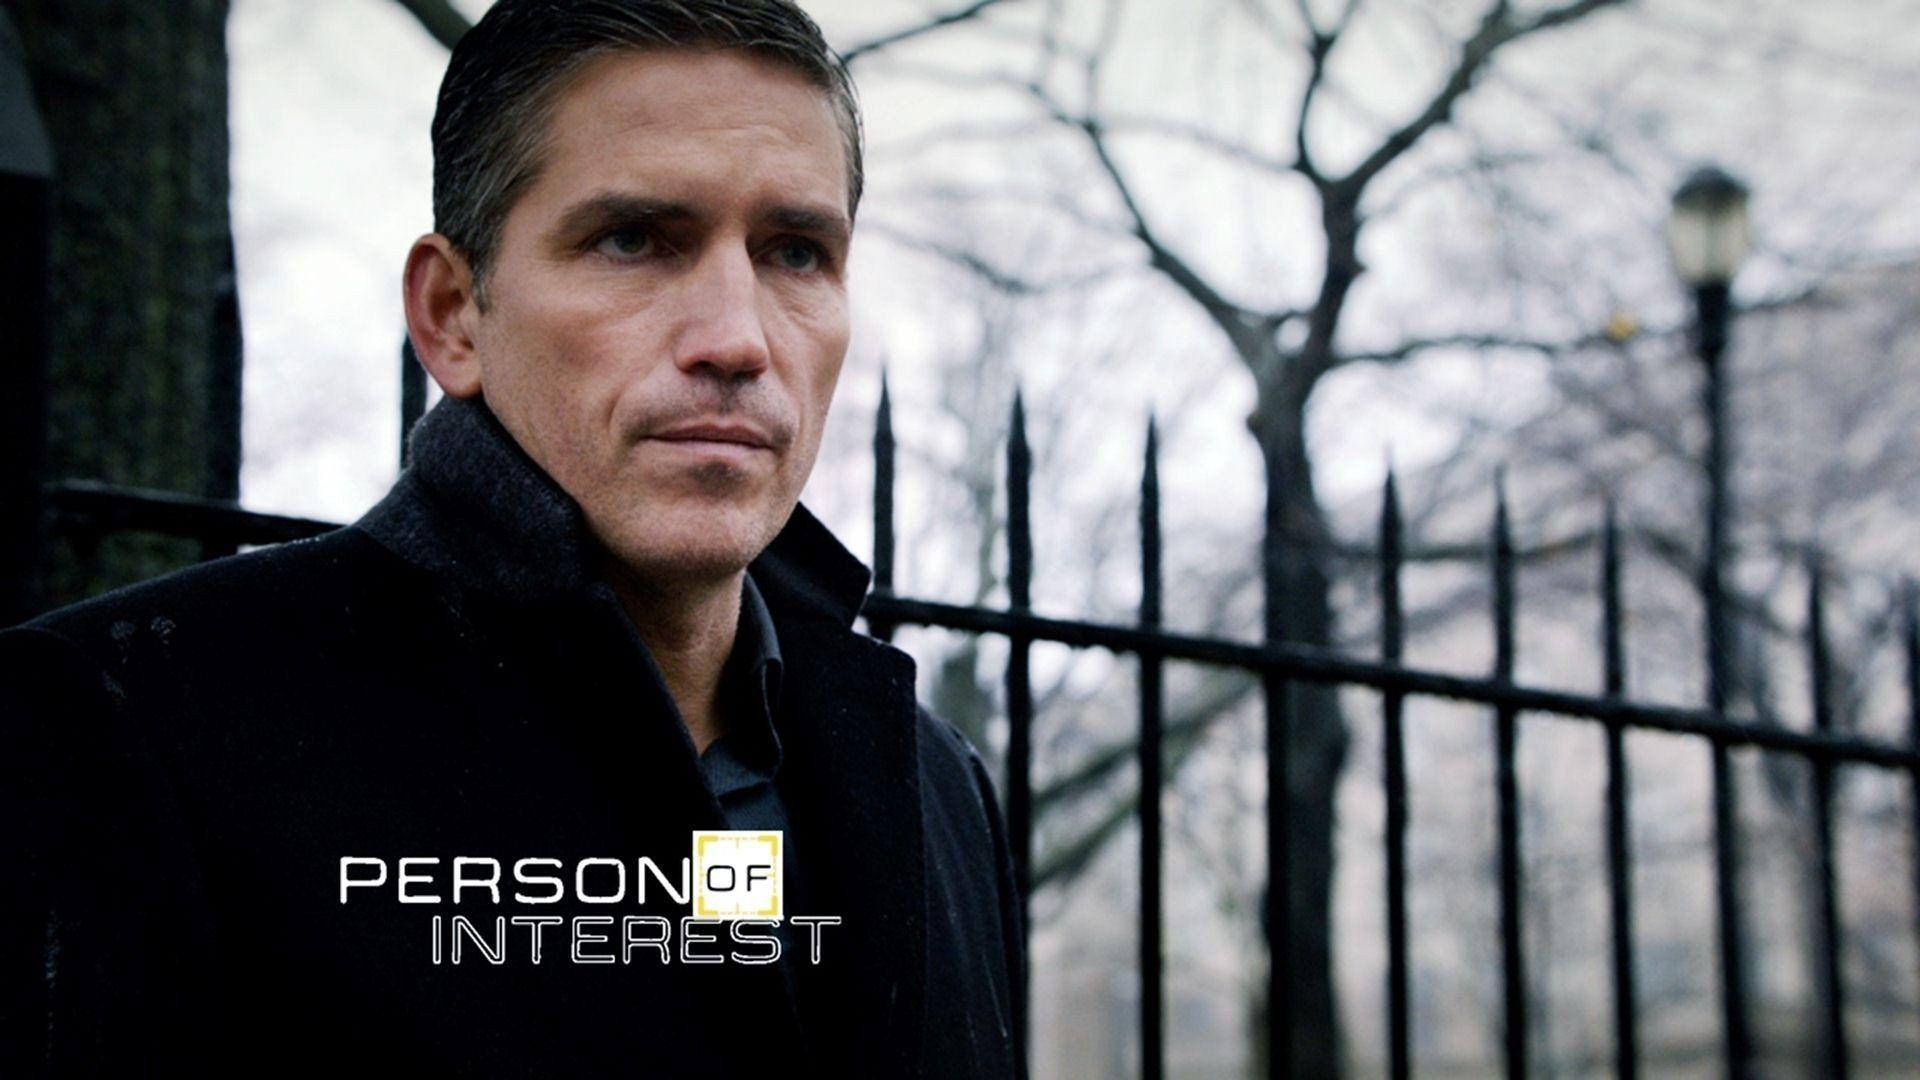 PERSON OF INTEREST action drama mystery series crime wallpaper